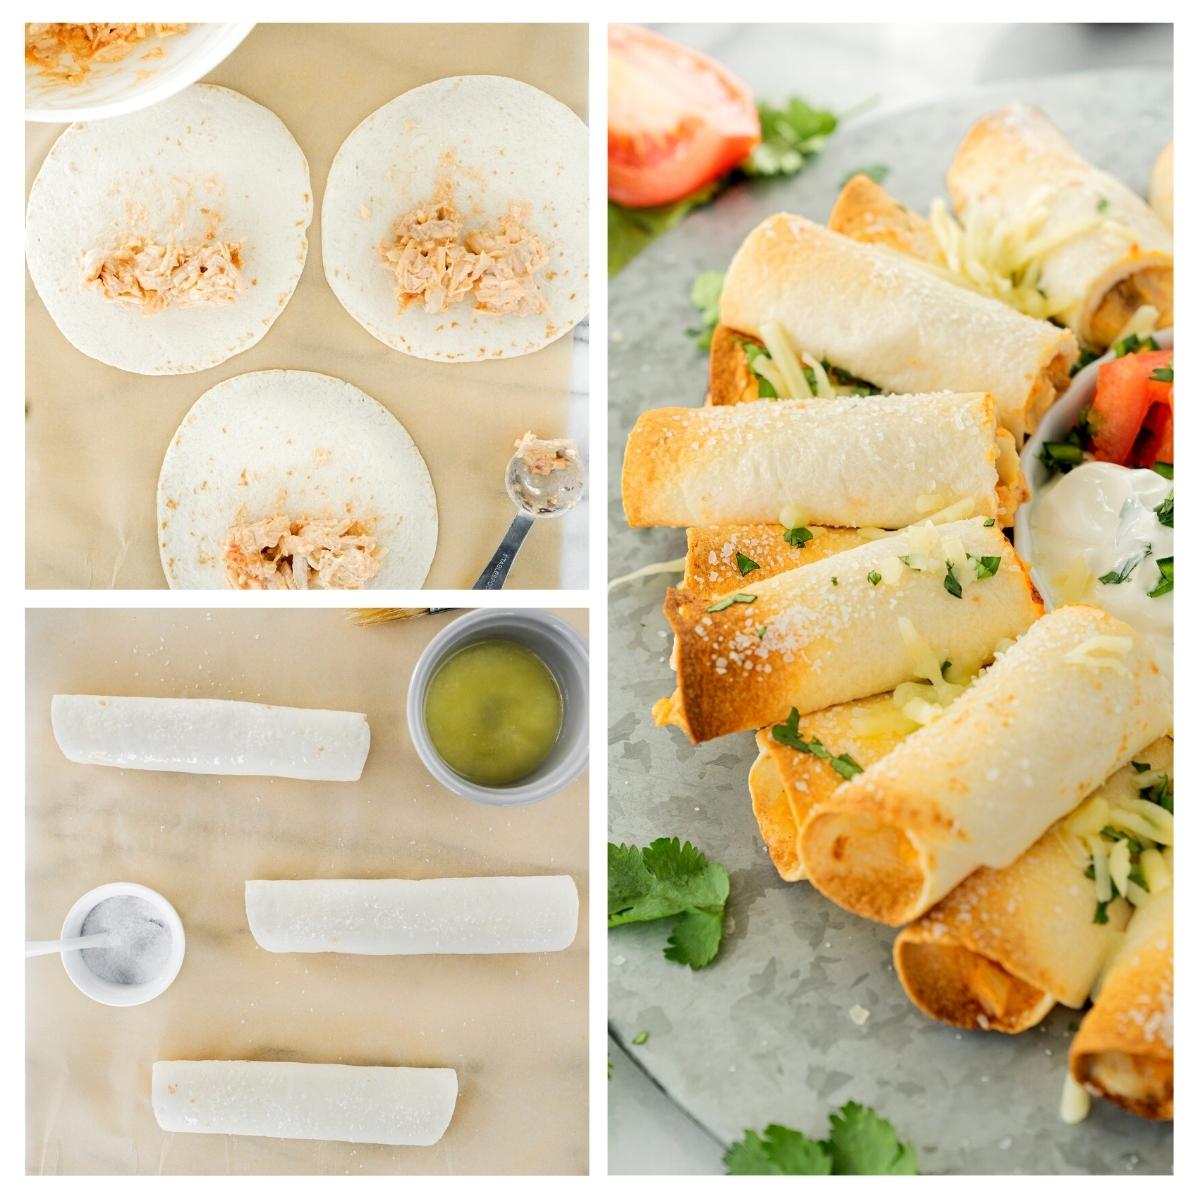 steps to bake and roll taquitos with cream cheese filling